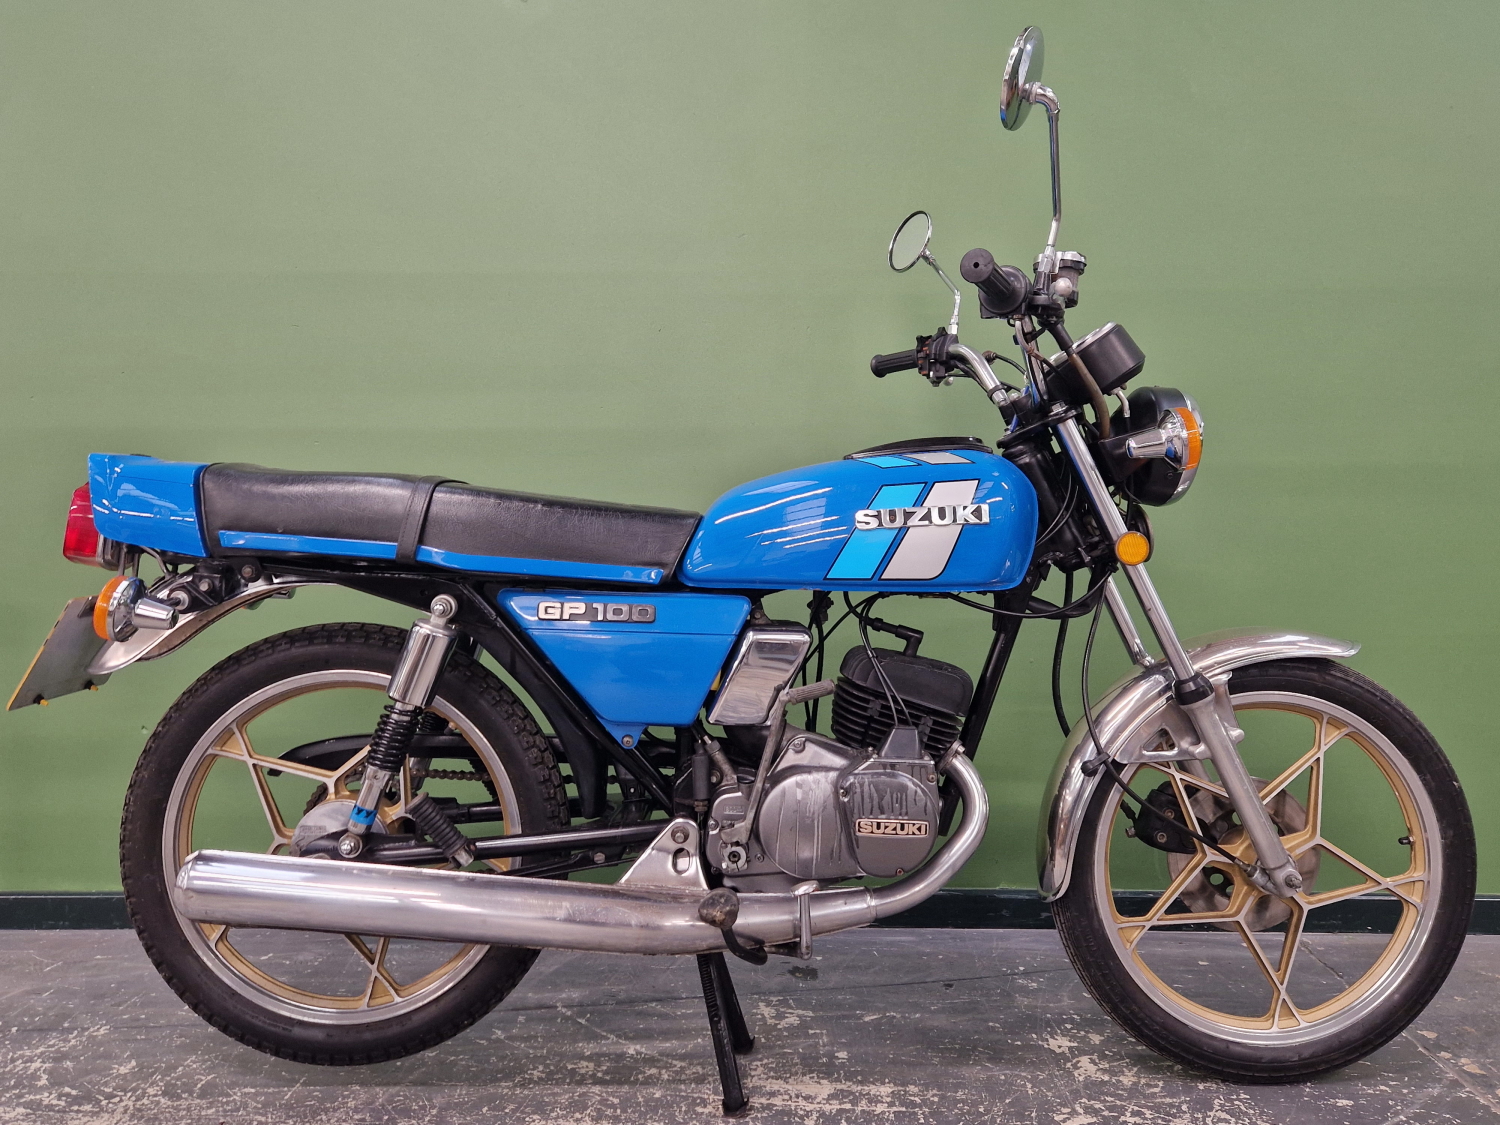 SUSUKI GP100 MOTORCYCLE 1983- APPROX 3860 MILES FROM NEW. GOOD RUNNER AND RIDER. - Image 2 of 2